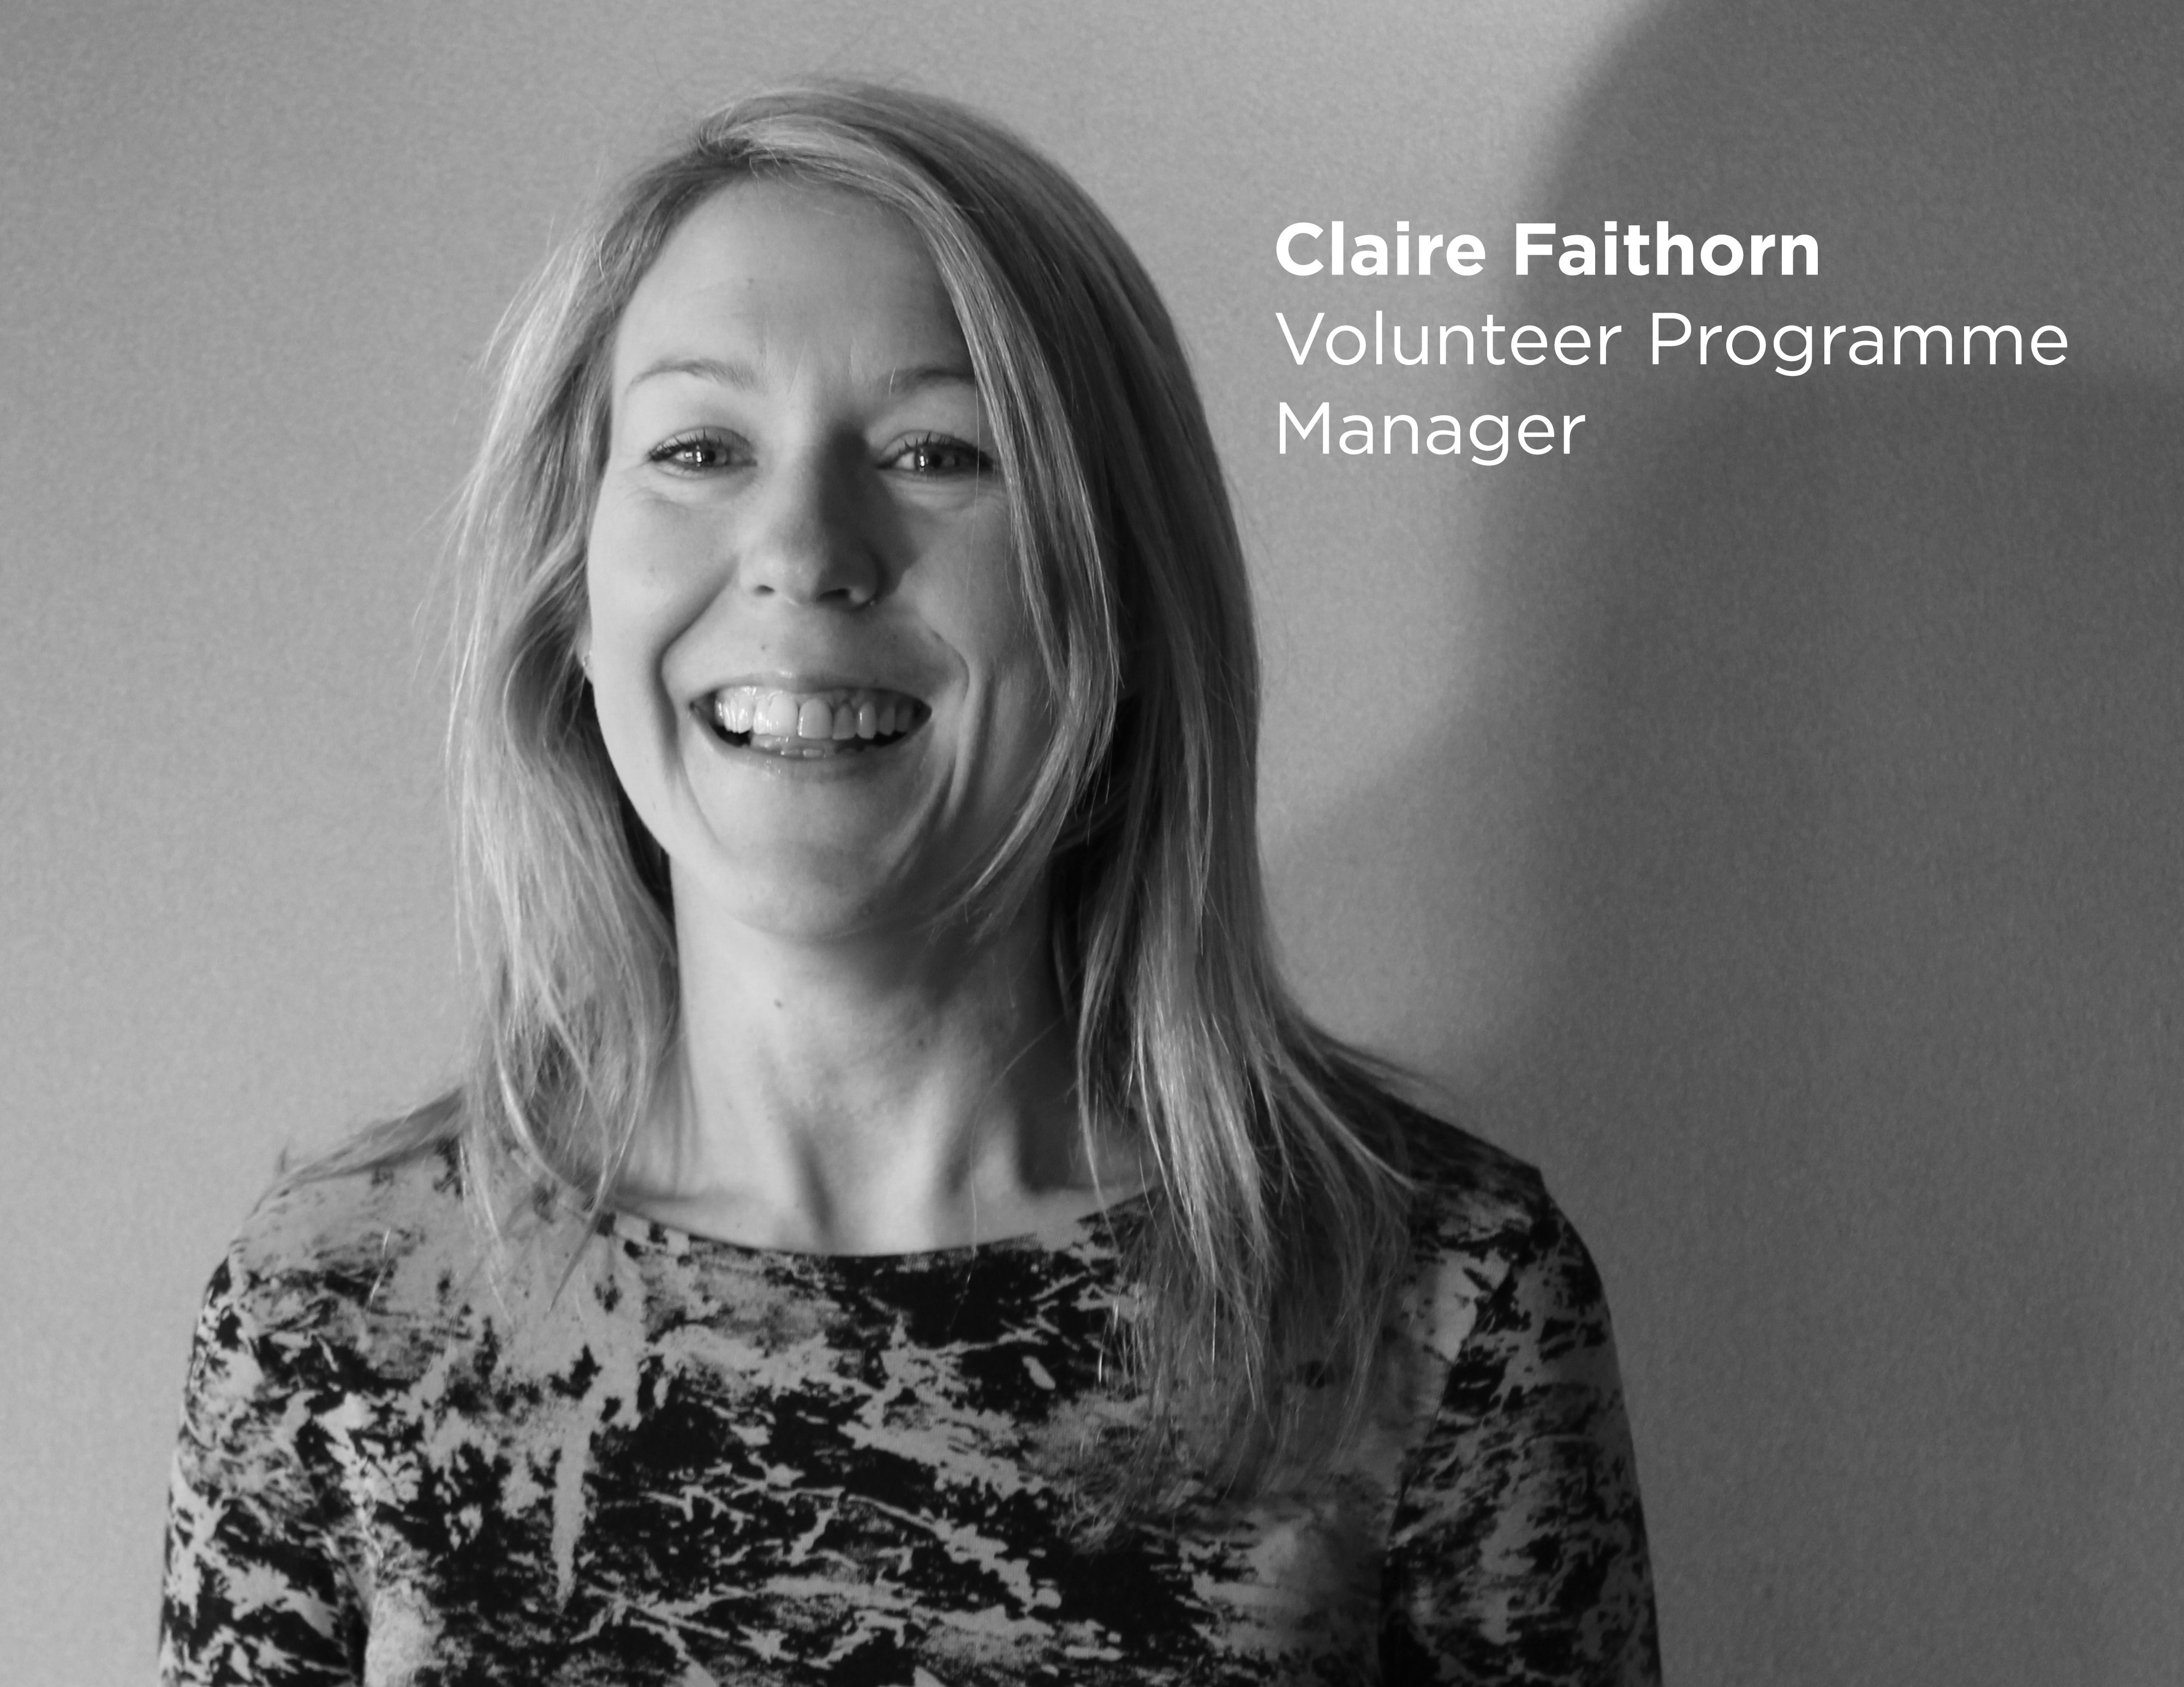 Claire Faithorn: The Fast Forward Programme, Sowing Seeds of Possibility